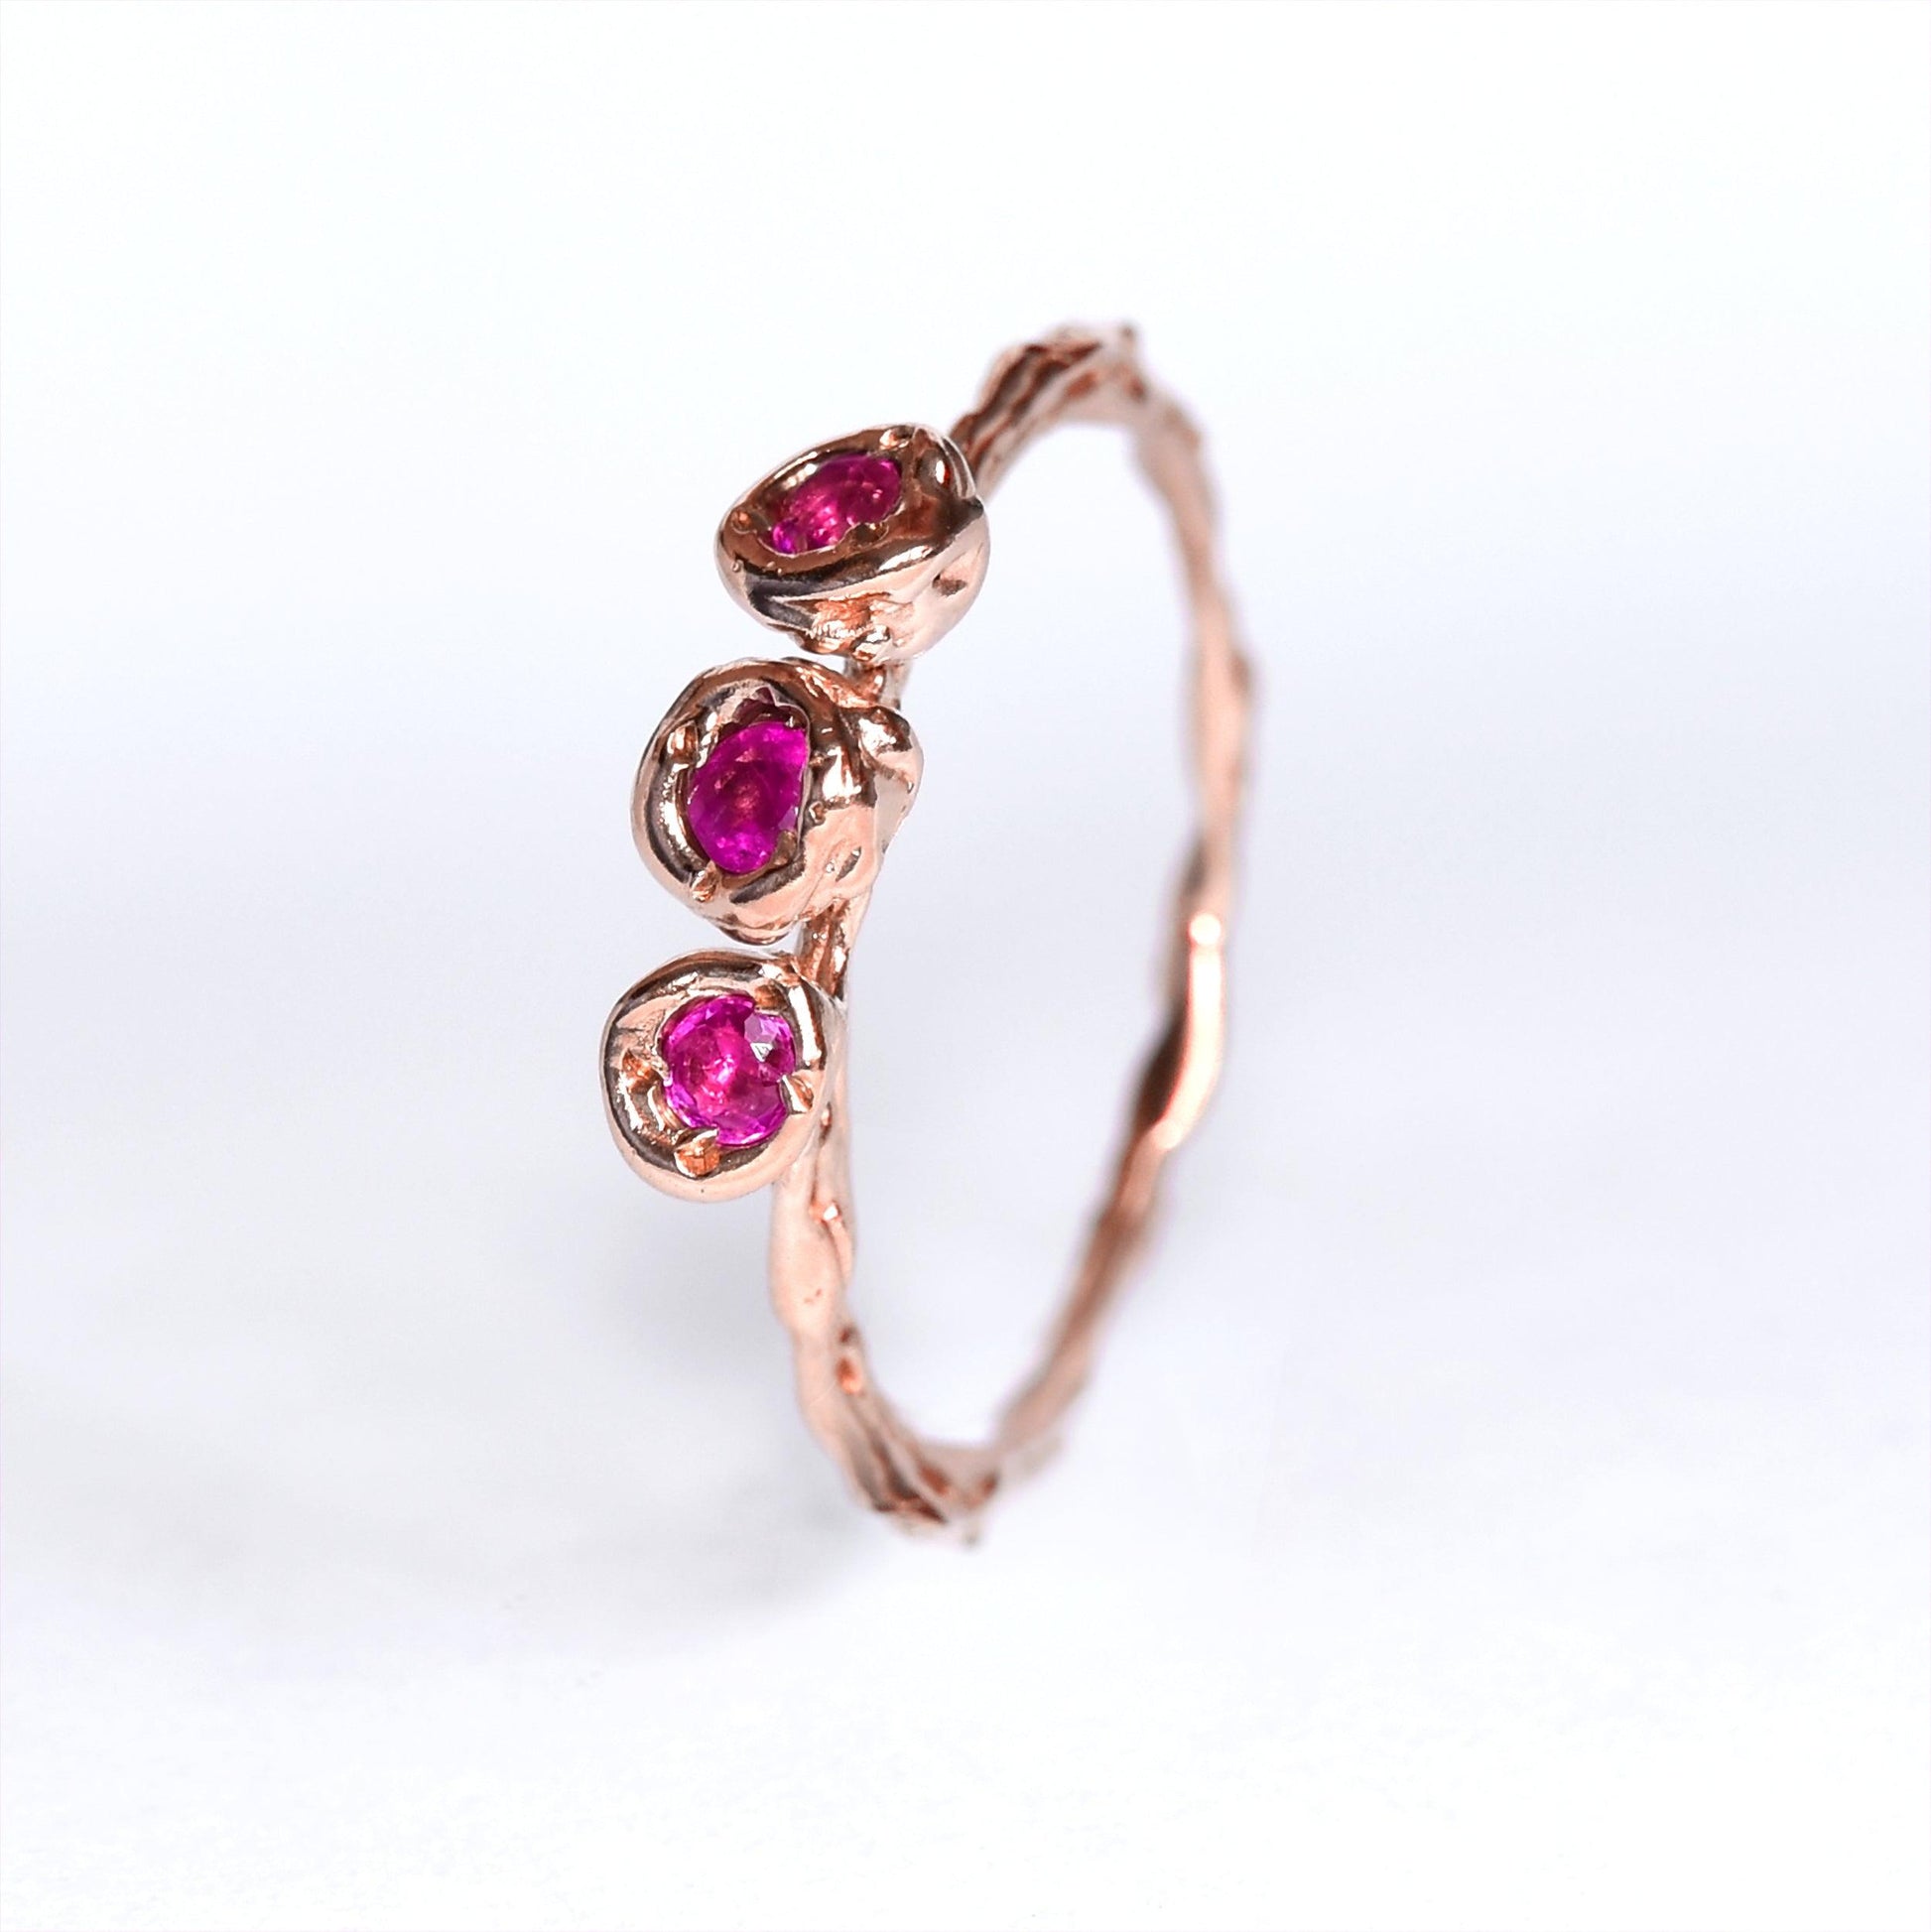 Rose Gold ring set with pink sapphires, one of a kind - LaParra Jewels-BESPOKE HAND MADE JEWLERY LONDON